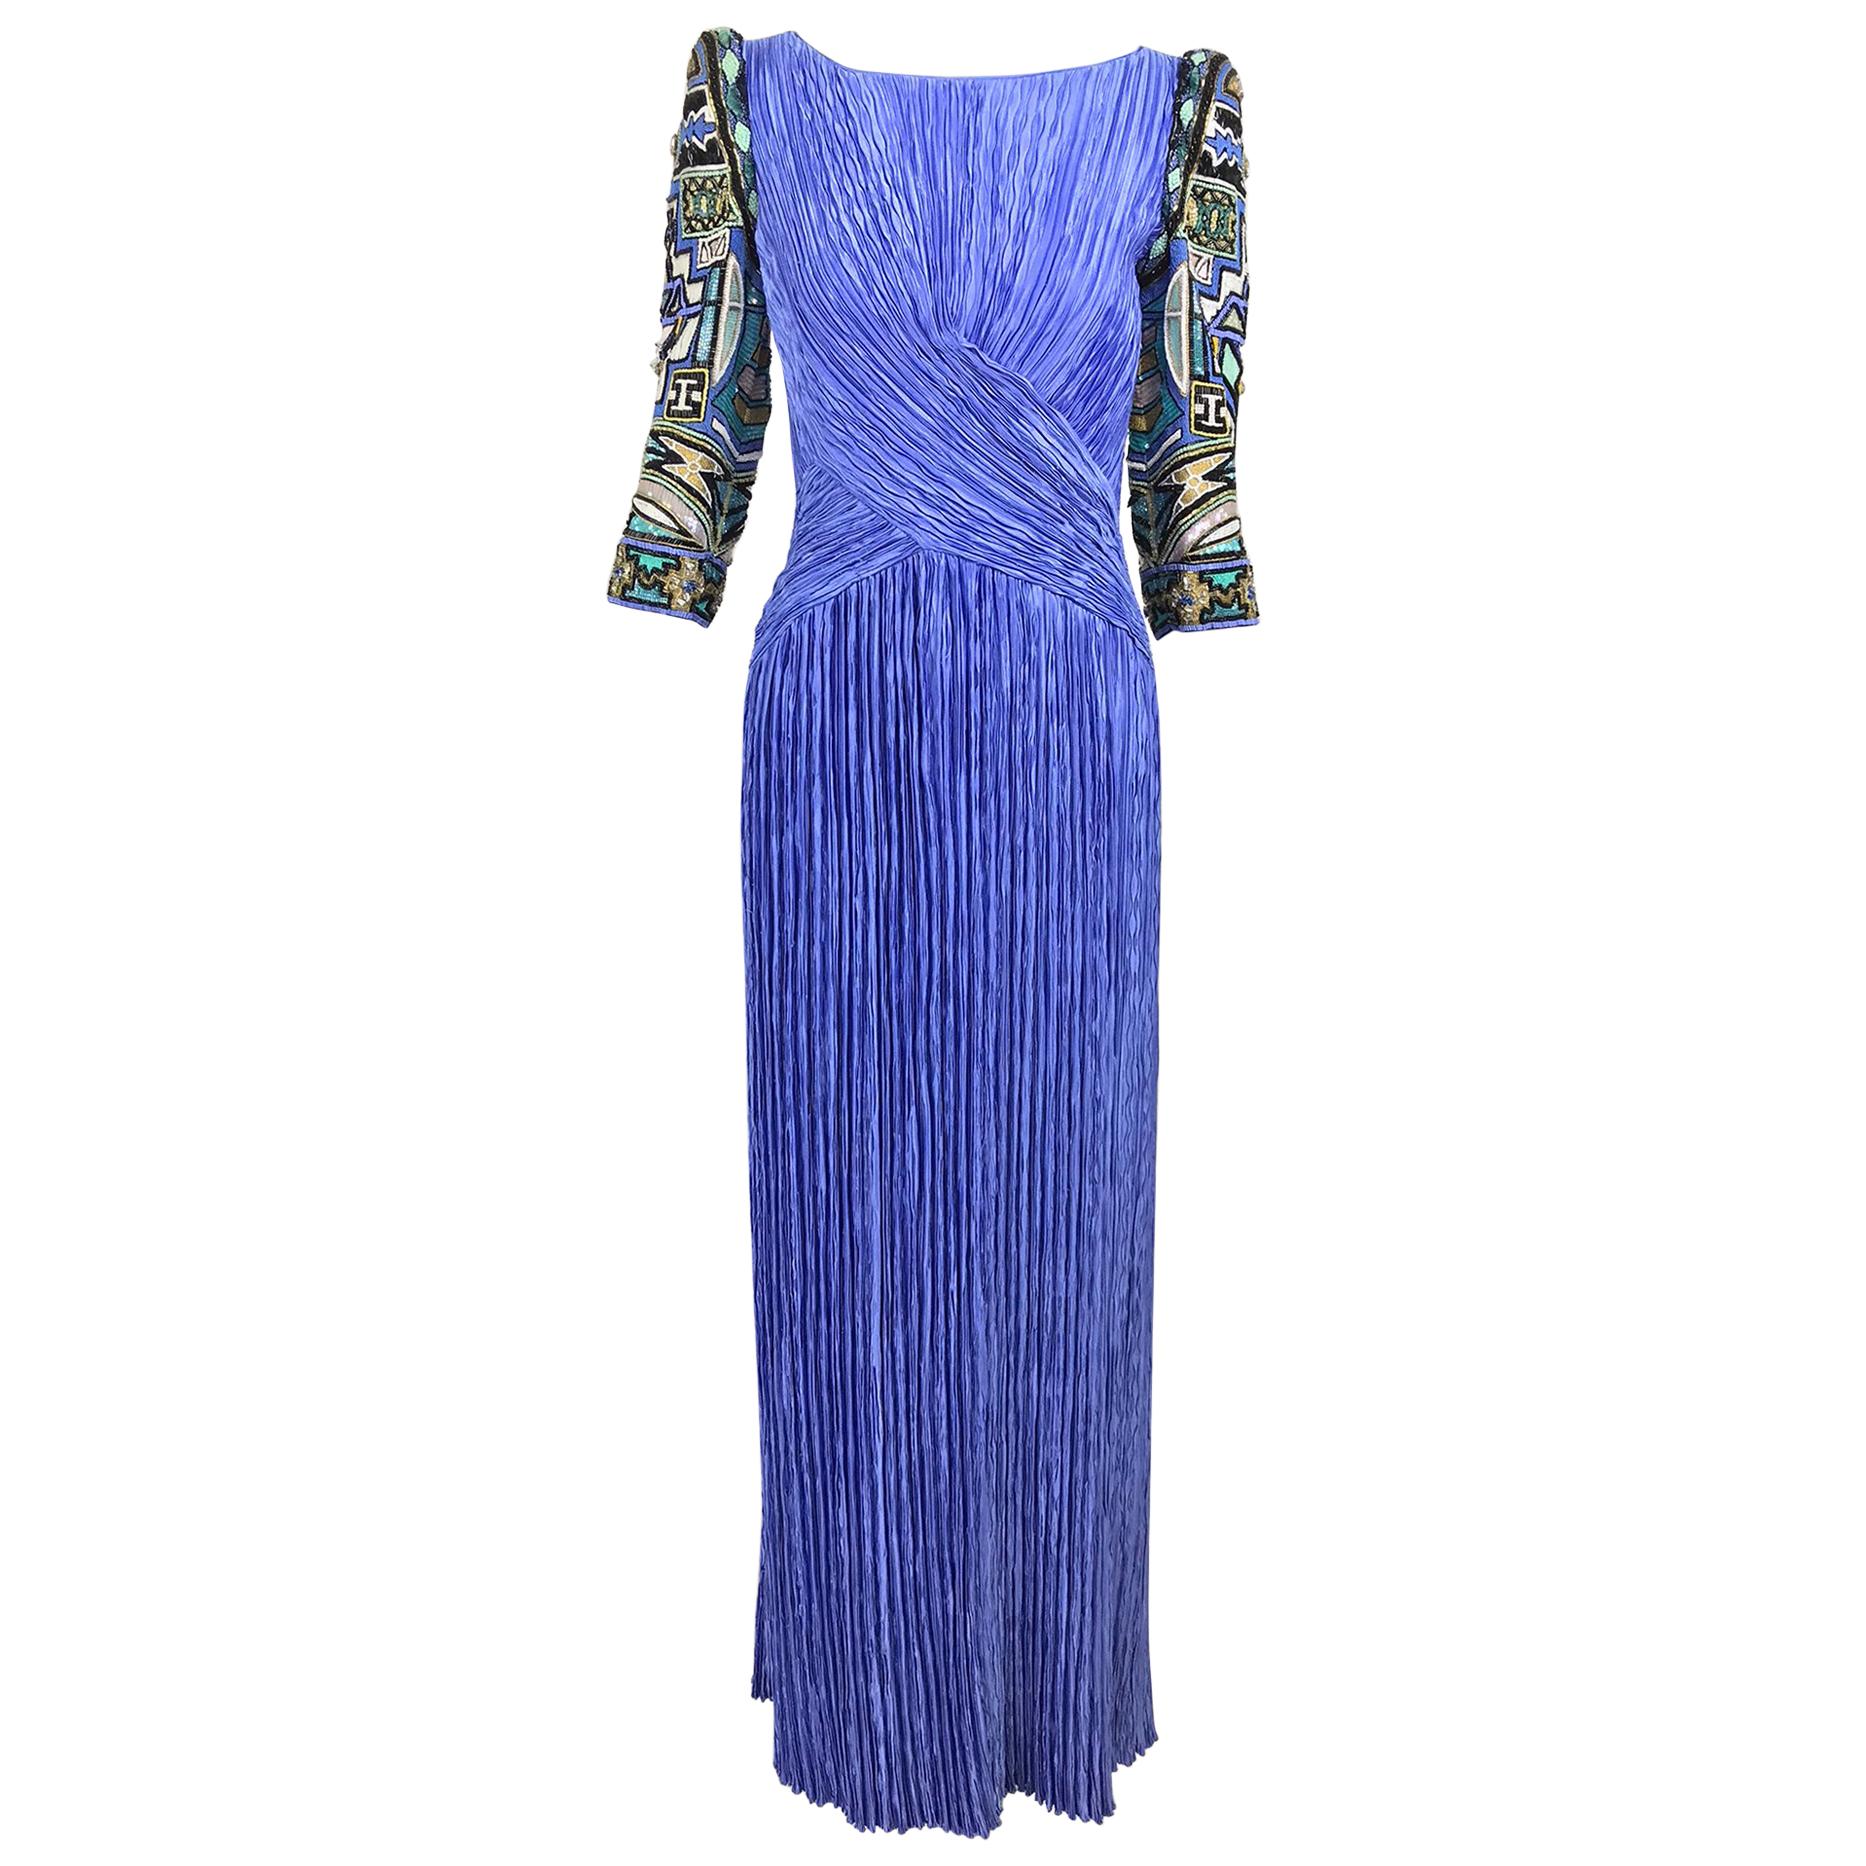 Mary McFadden Couture Art Beaded Pleated Evening Gown in Blue 1980s